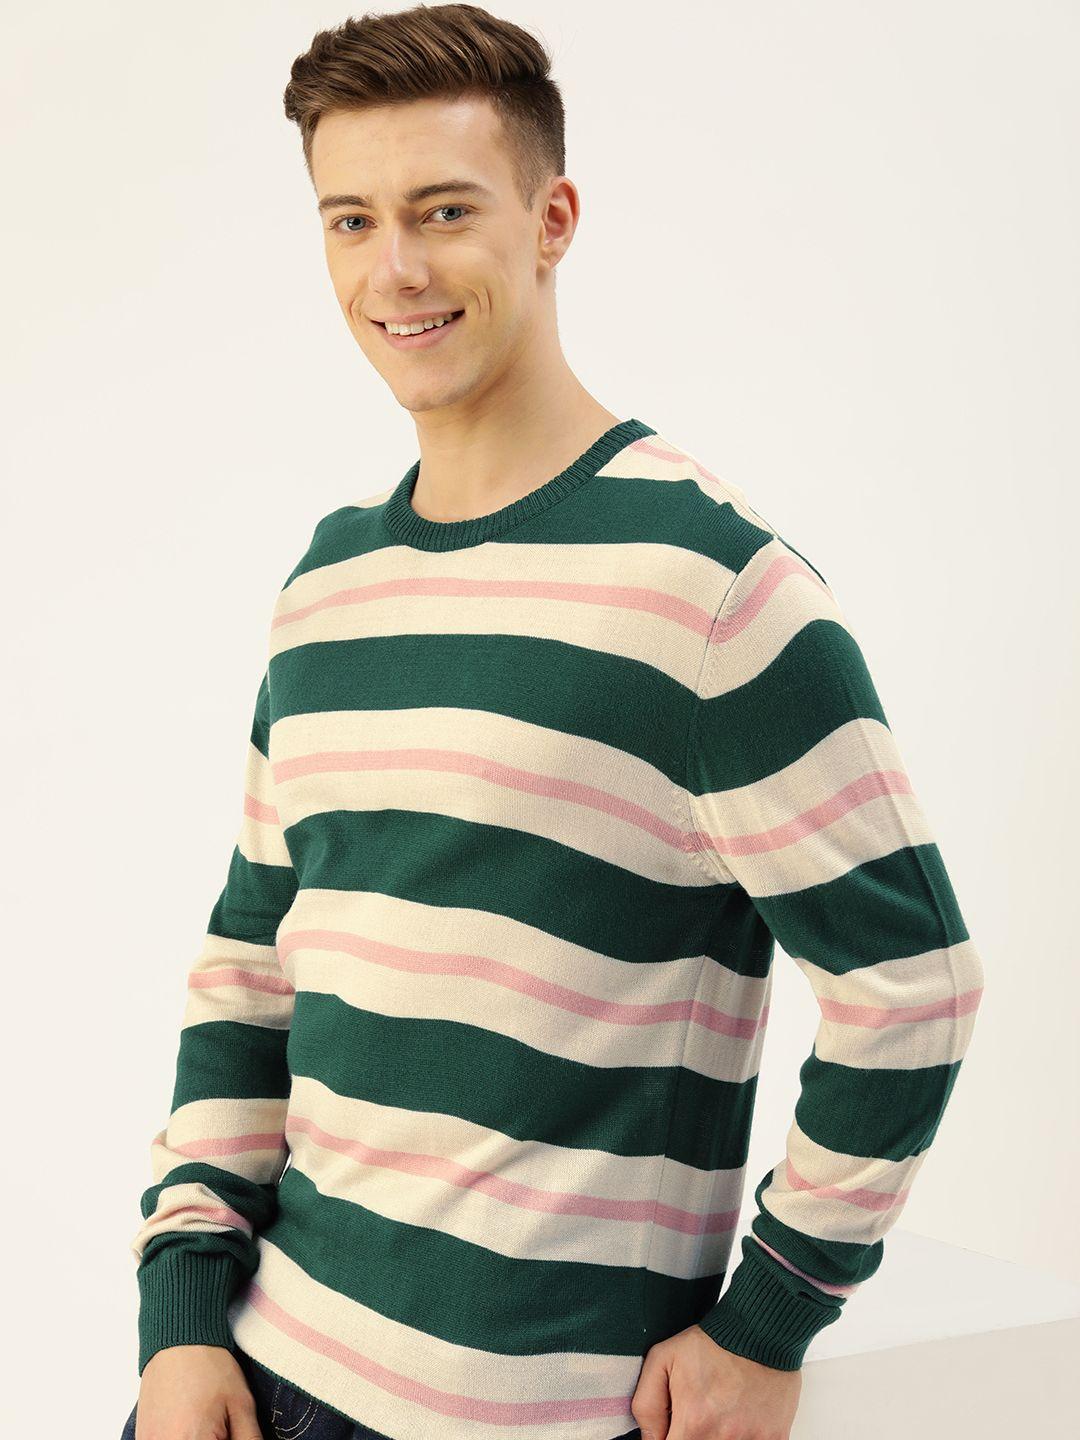 mast & harbour striped pullover sweater